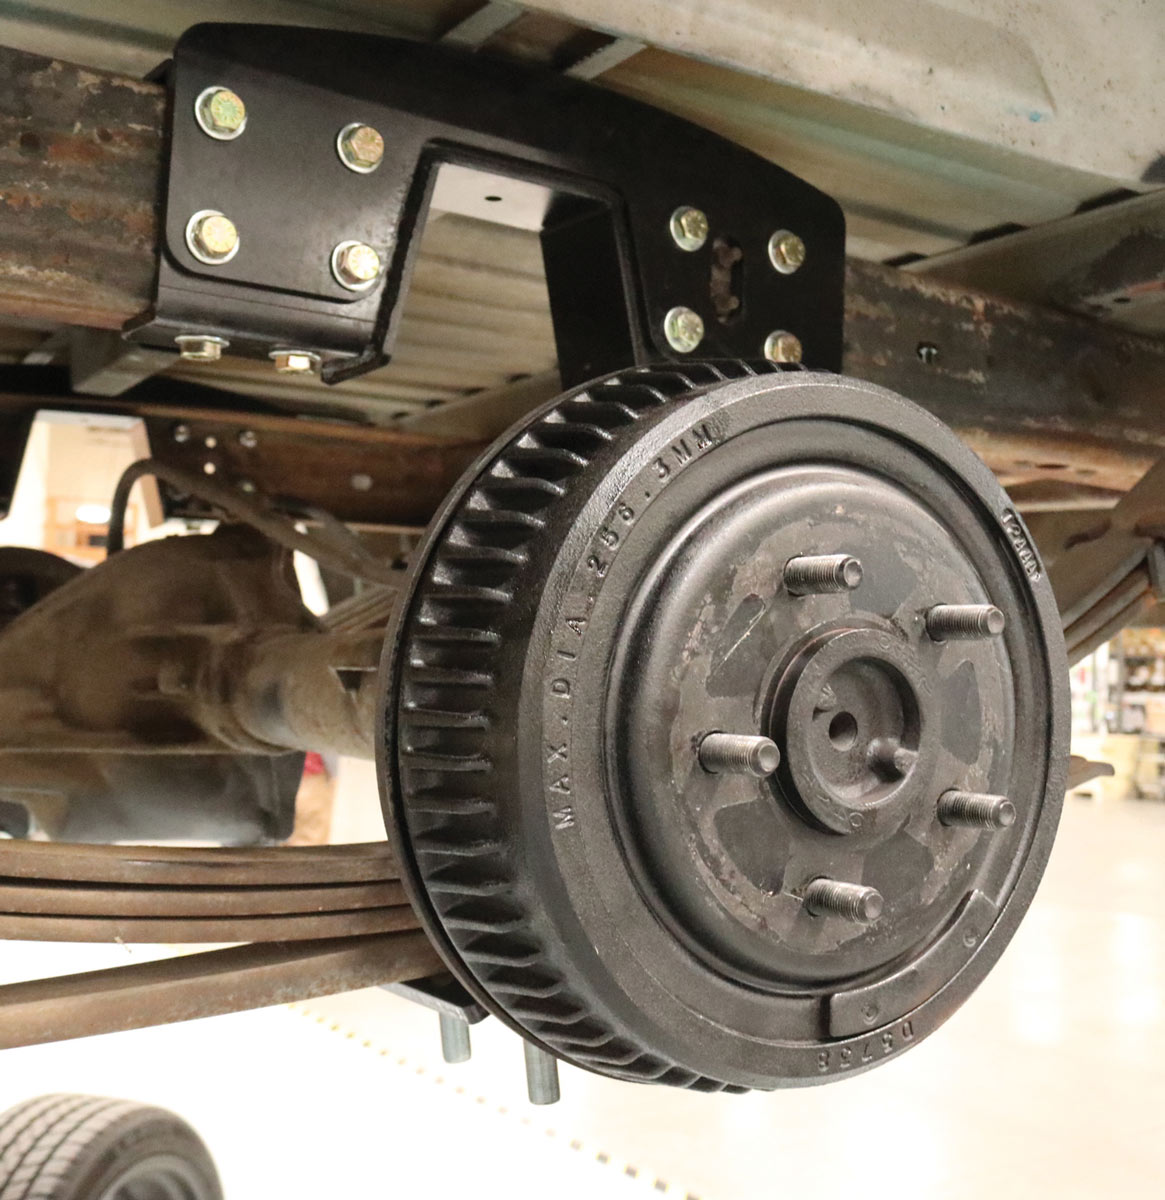 close up of the soon to be replaced, oh-so-familiar 10-inch drum brake